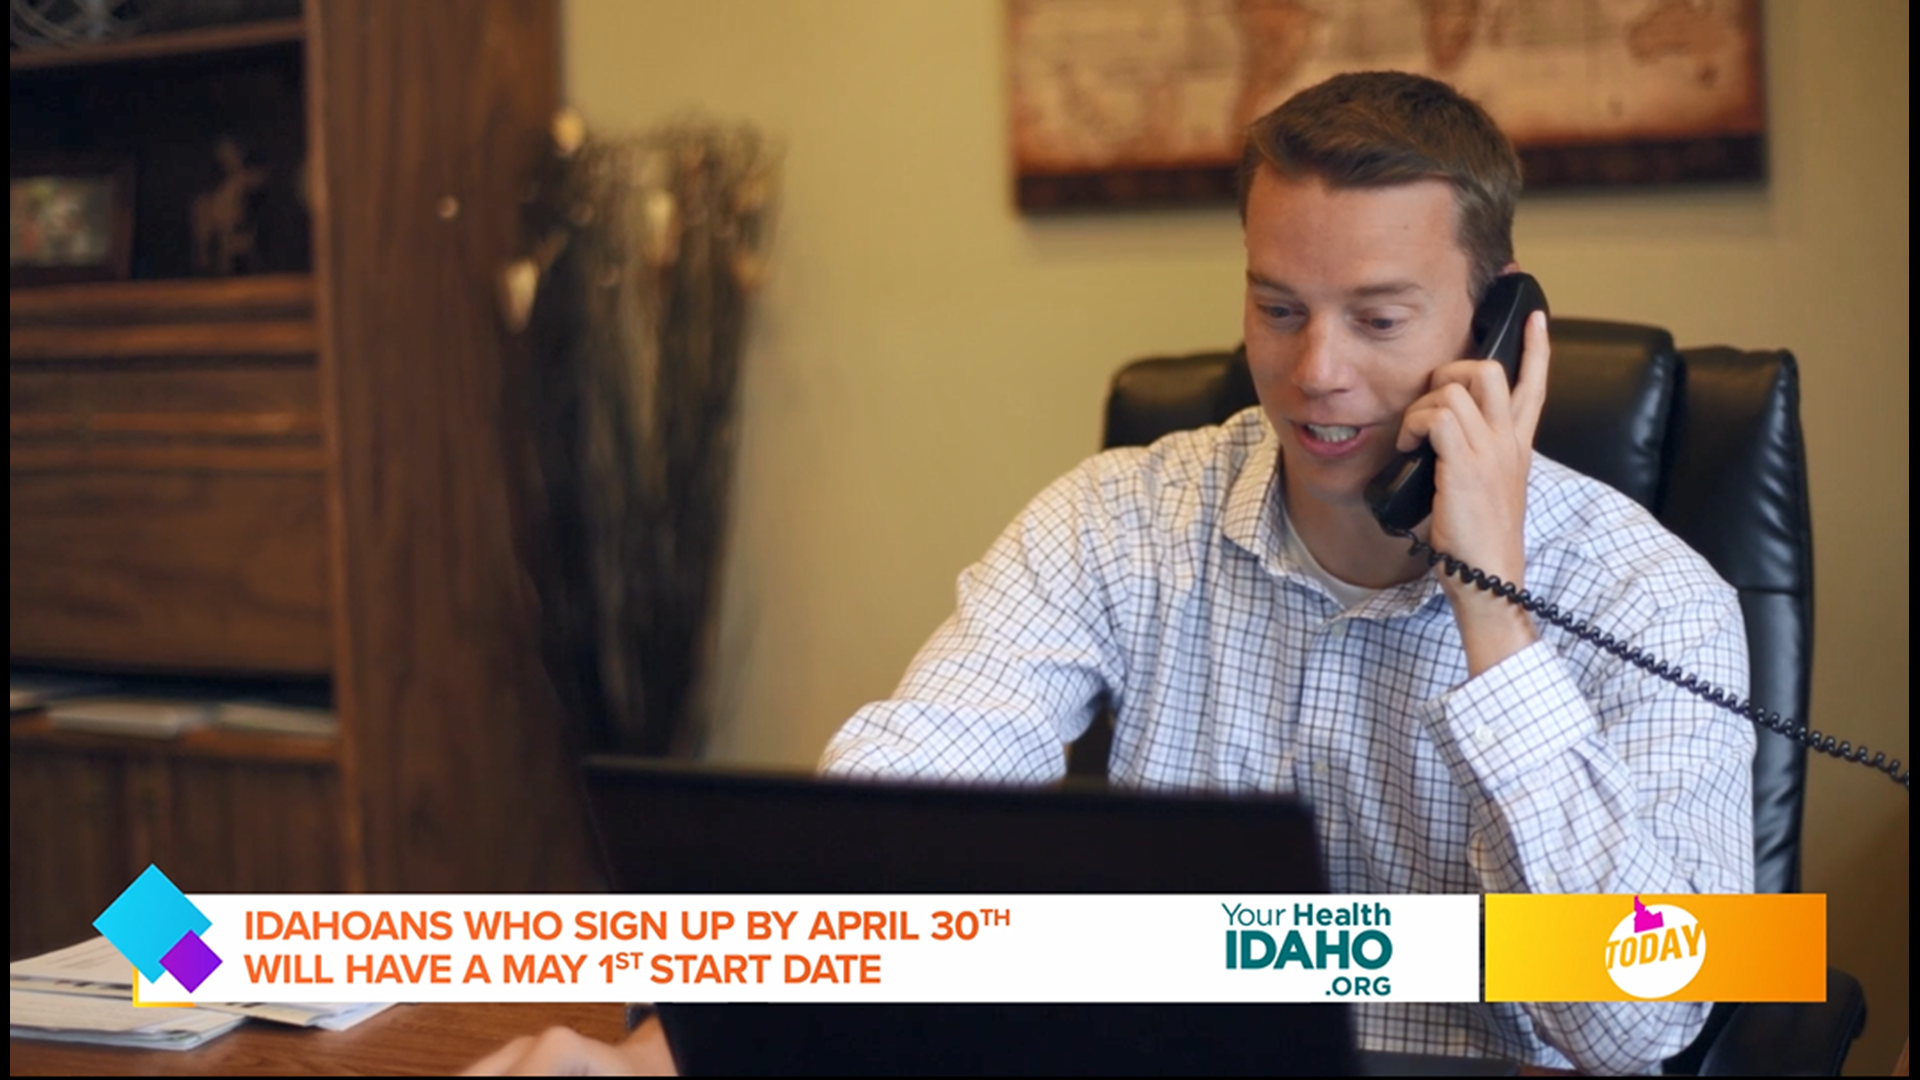 Idahoans who sign up for coverage by April 30th will have a May 1st start date, more info here: https://www.yourhealthidaho.org/shop-compare-enroll/